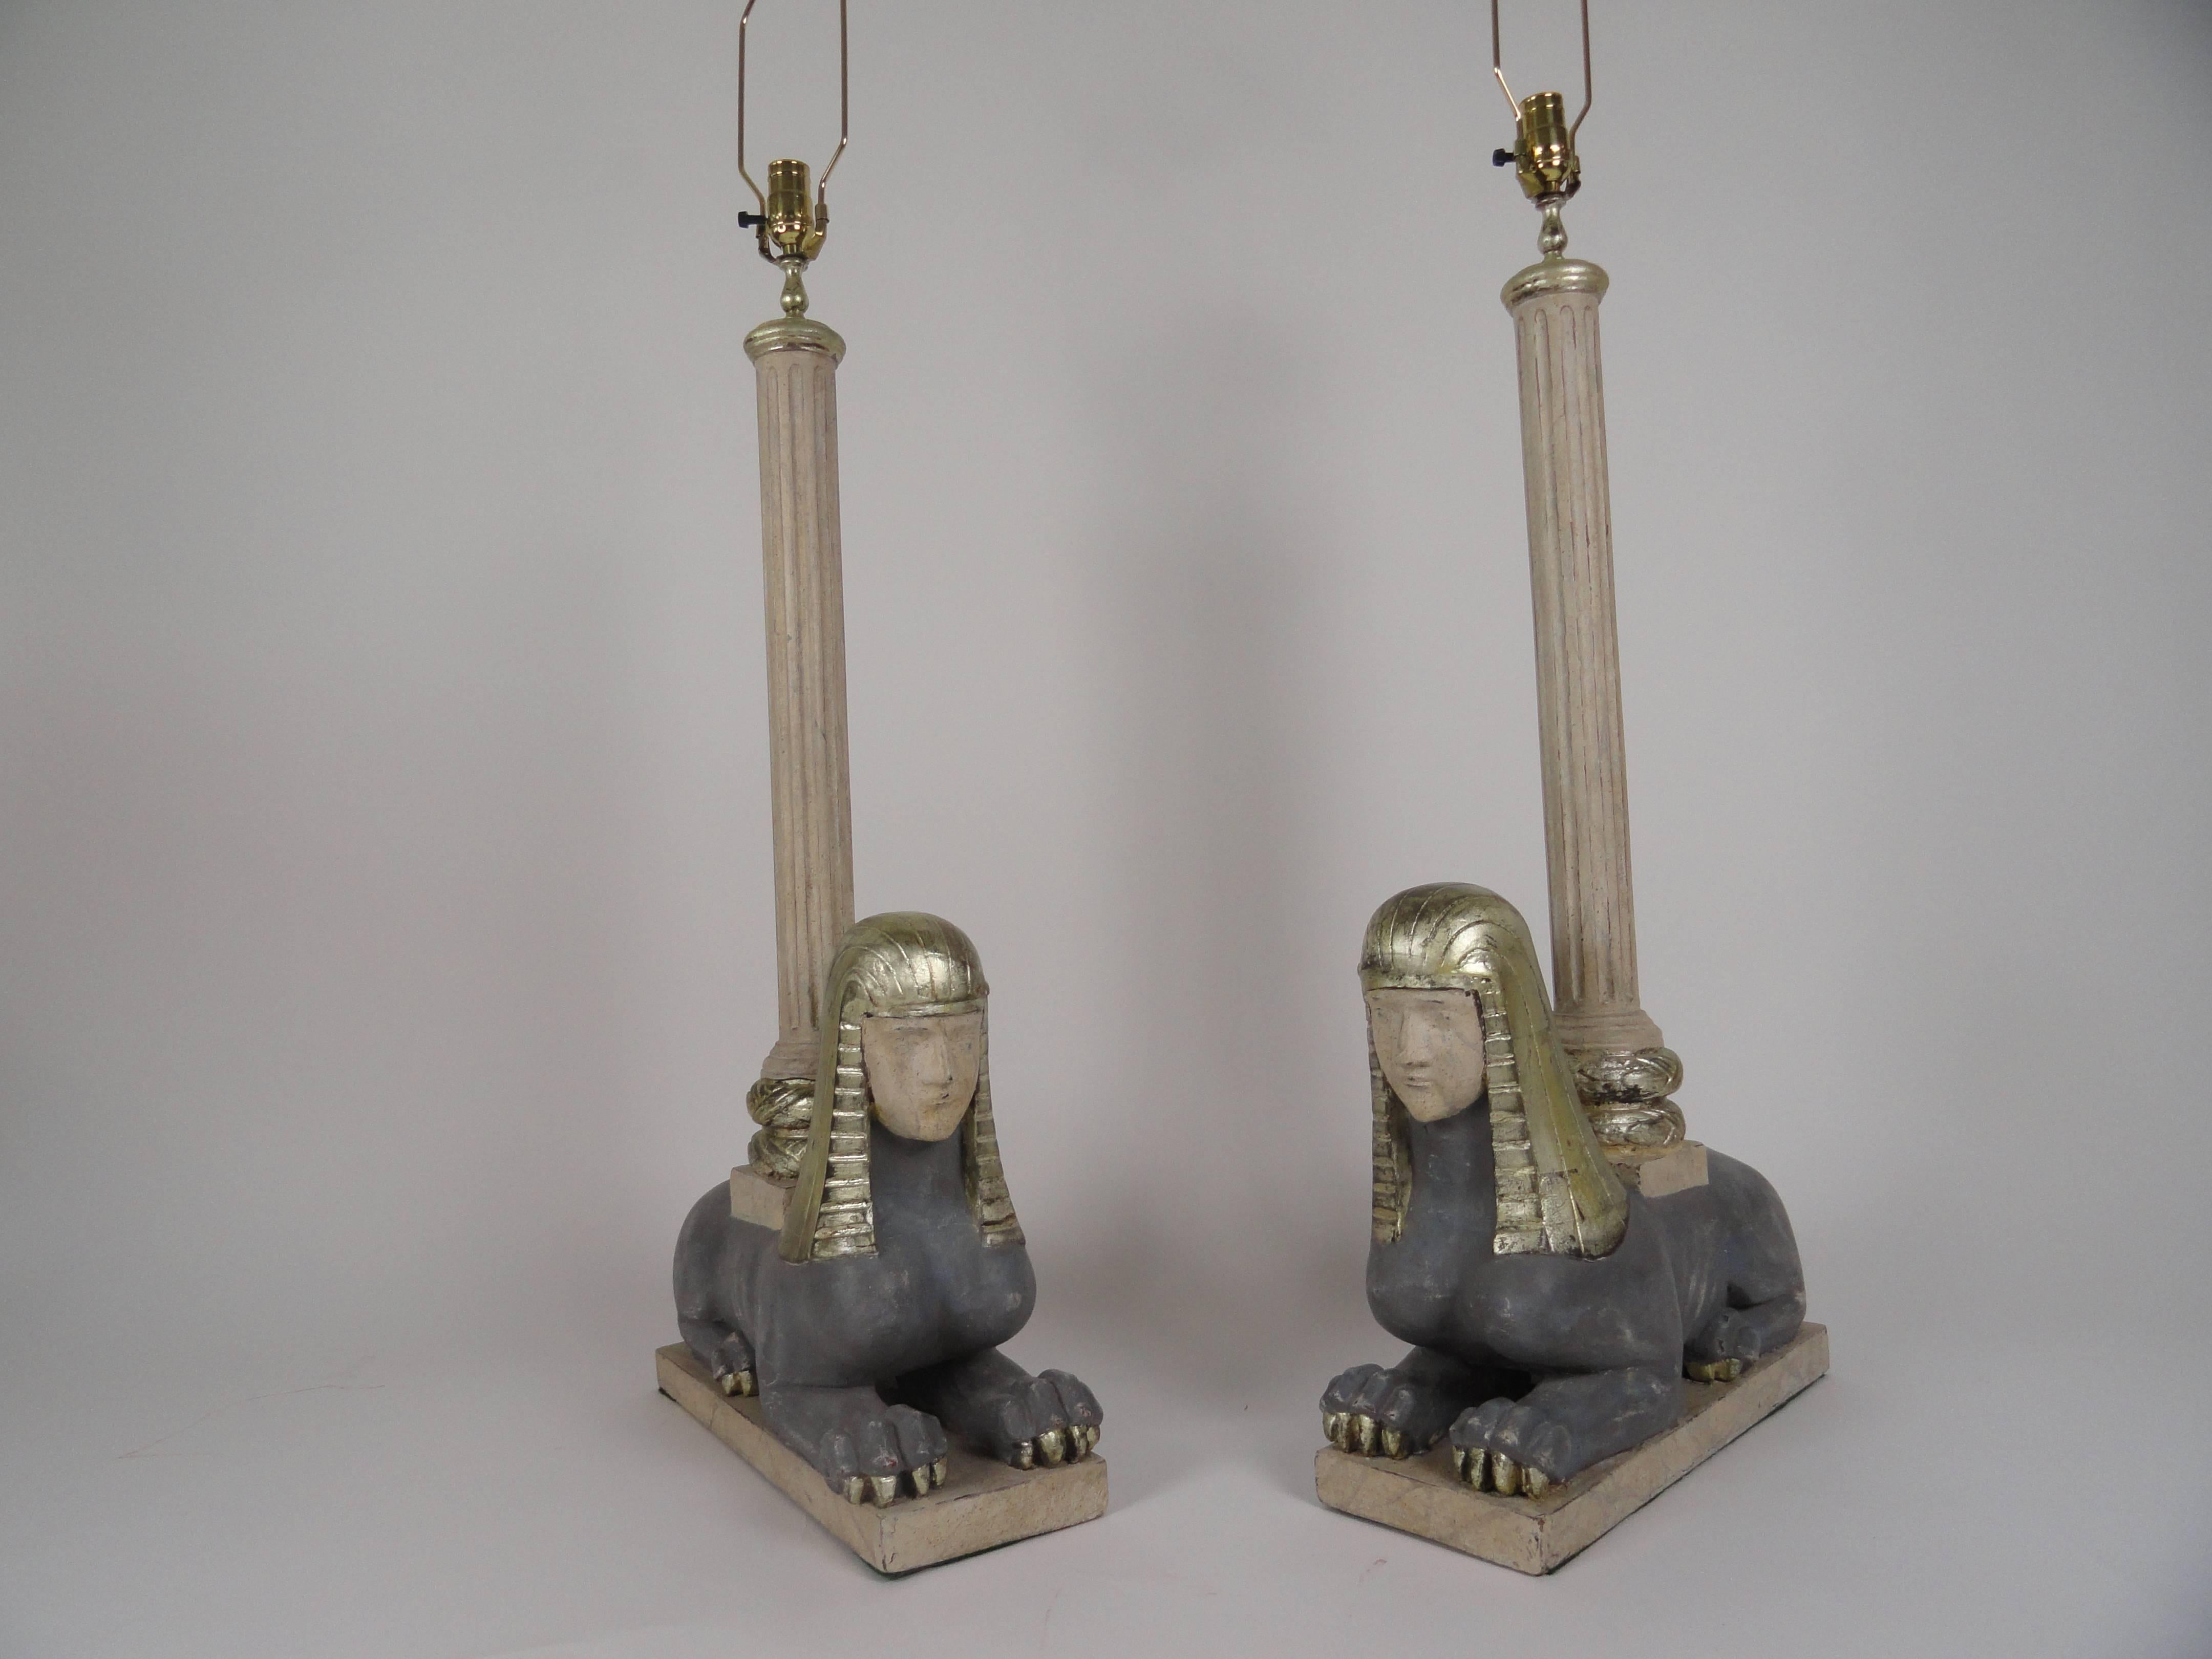 This amazing pair of Bugatti style Egyptian revival fluted column lamps has kneeling Sphinx bases. Pair of Italian lamps in the manner of Bugatti. Carved wood with fluted columns. Newer finish of grays and white gold leaf. Rewired with inline